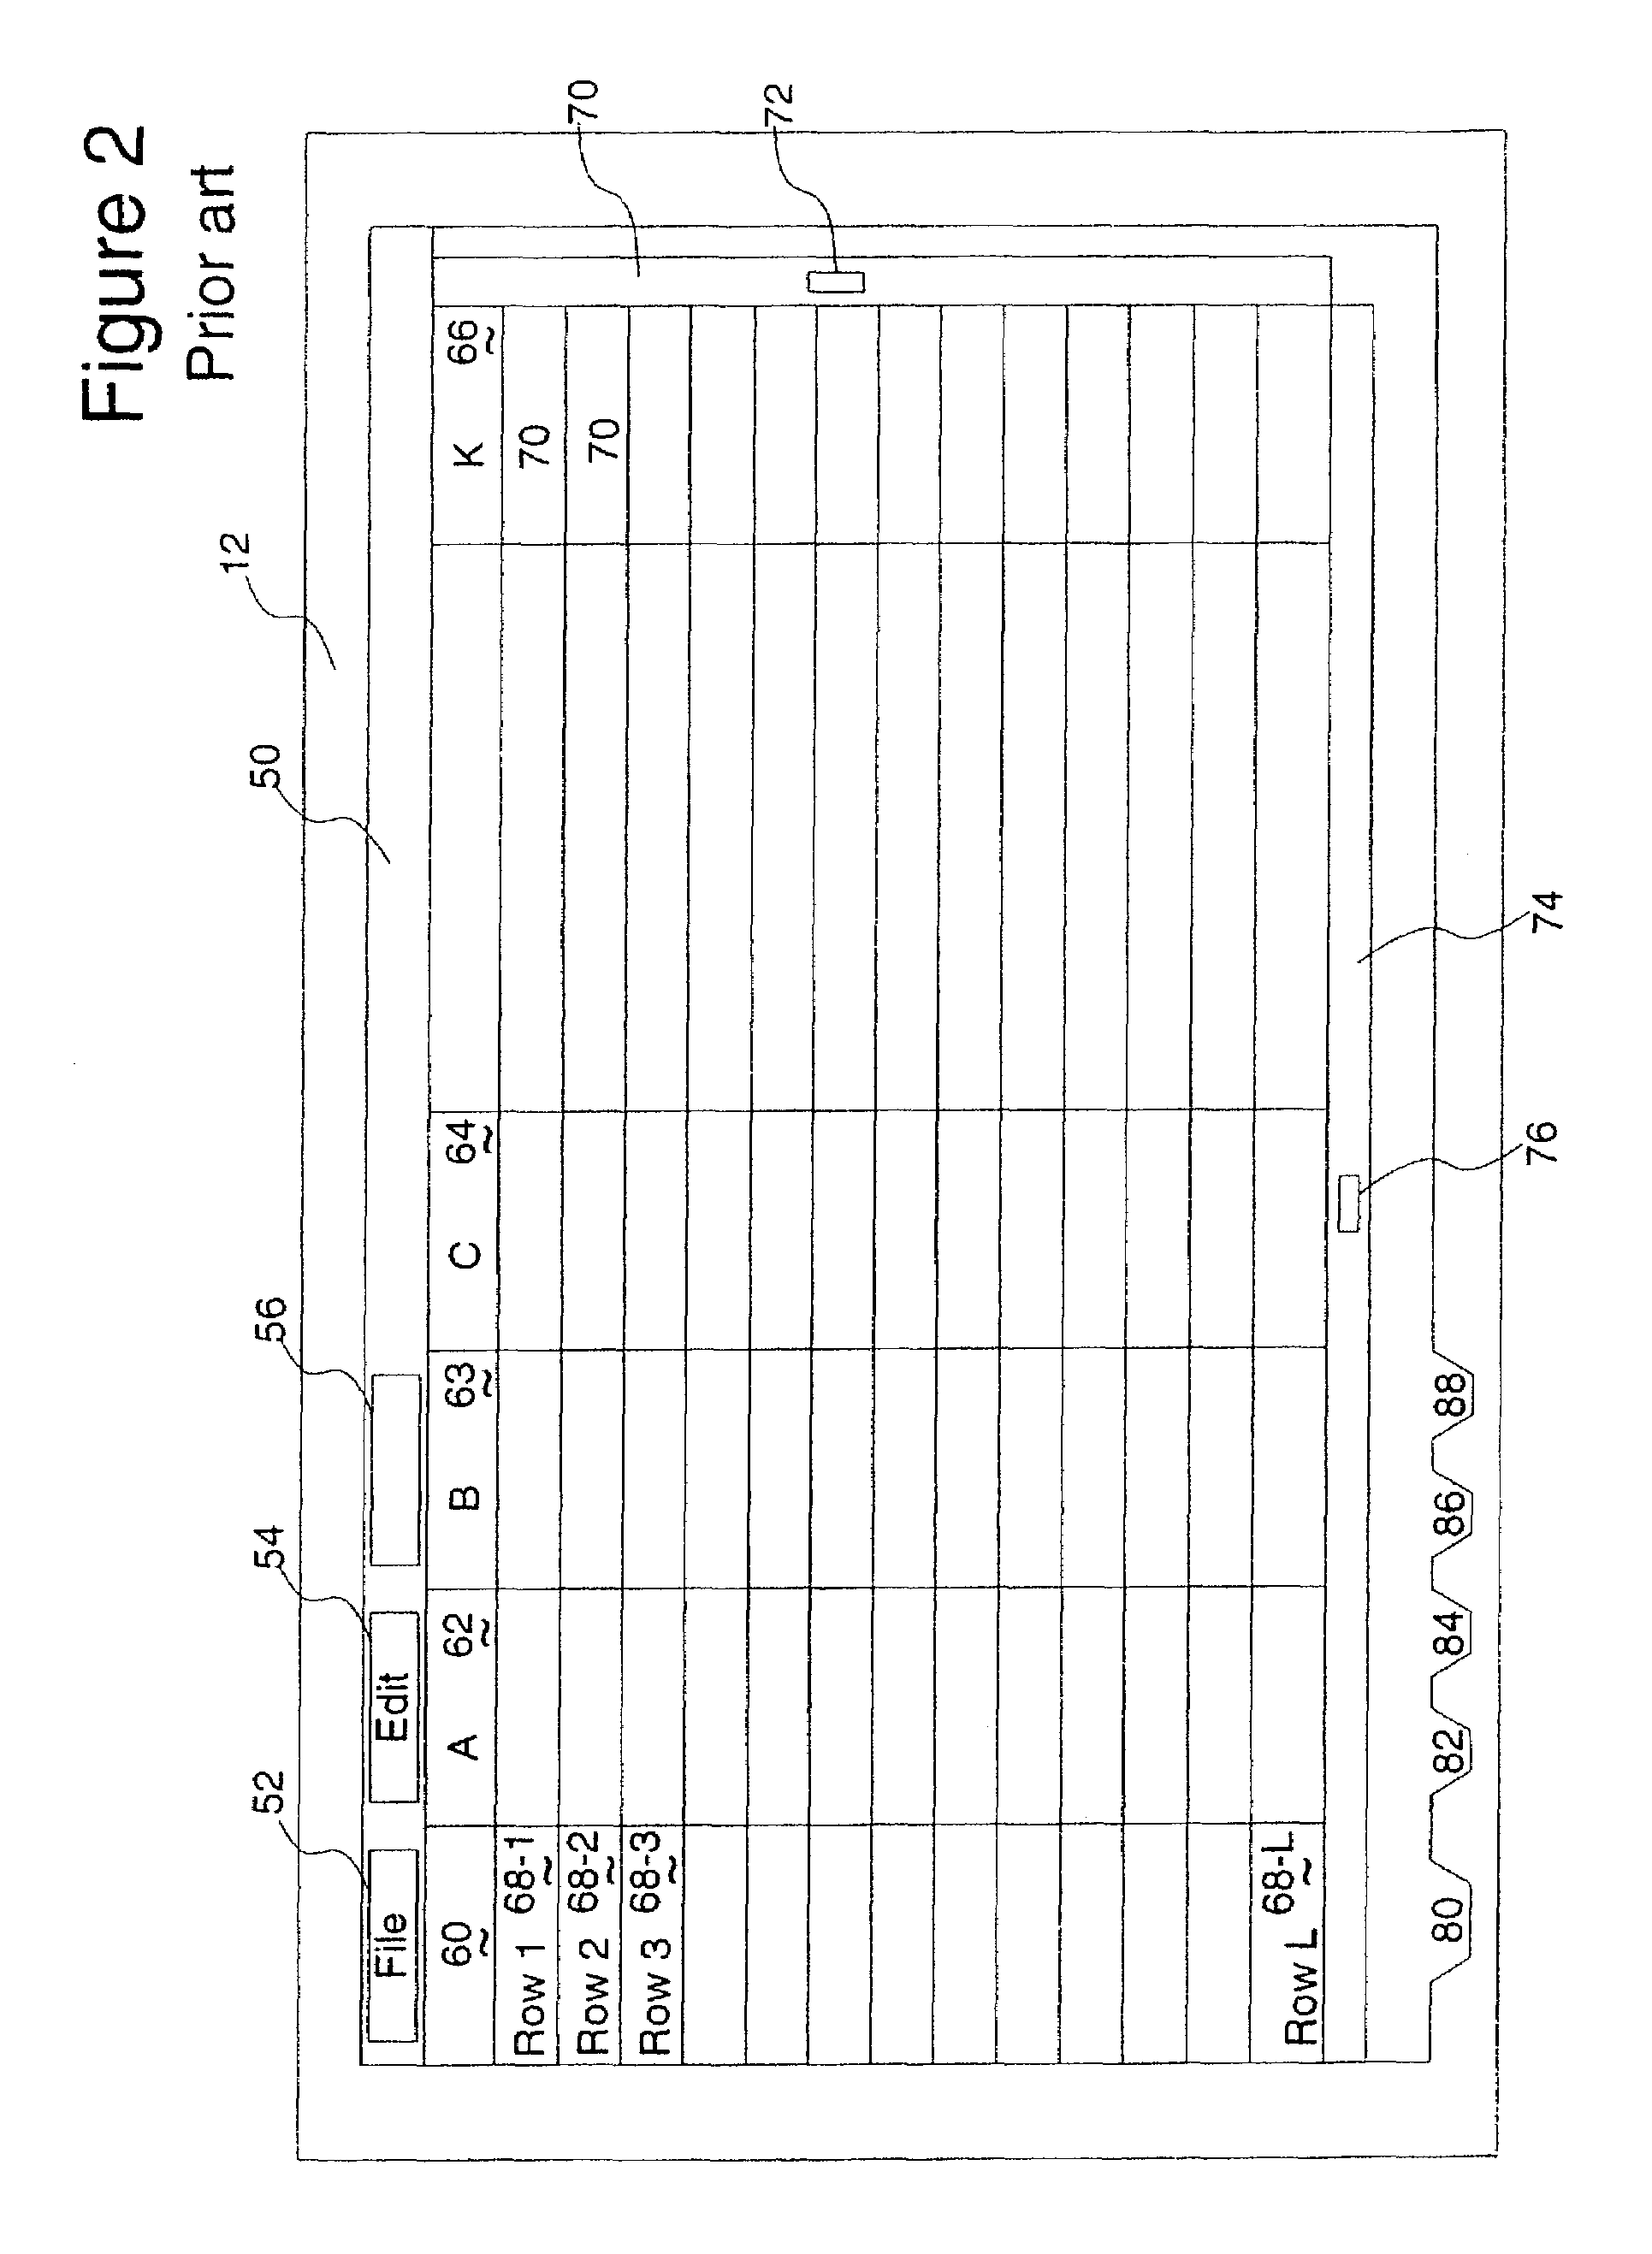 Method, apparatus and article of manufacture for displaying content in a multi-dimensional topic space